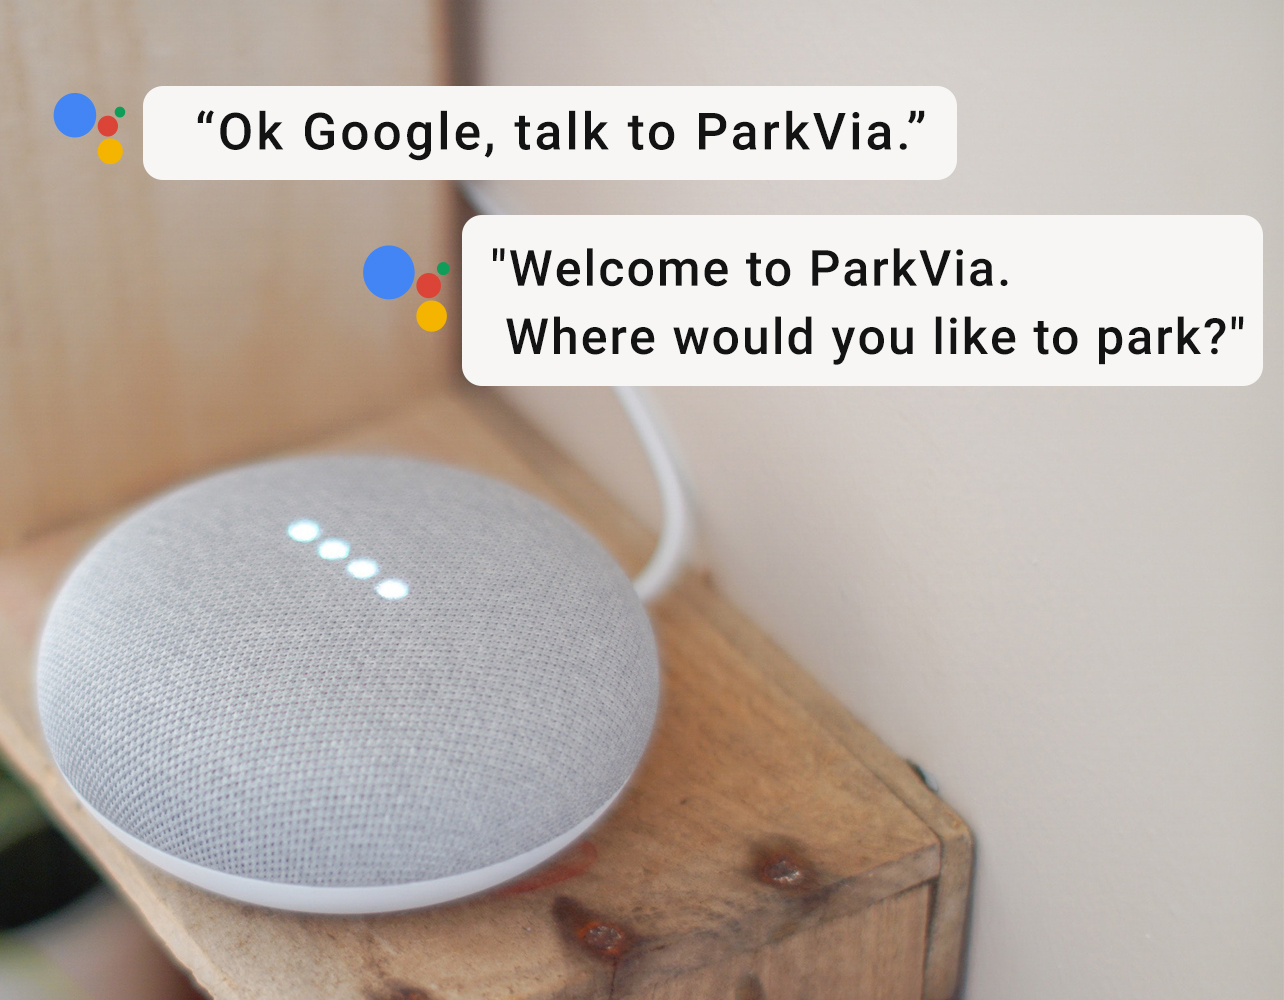 ParkVia has committed to employing voice booking technology for its users in 2020.